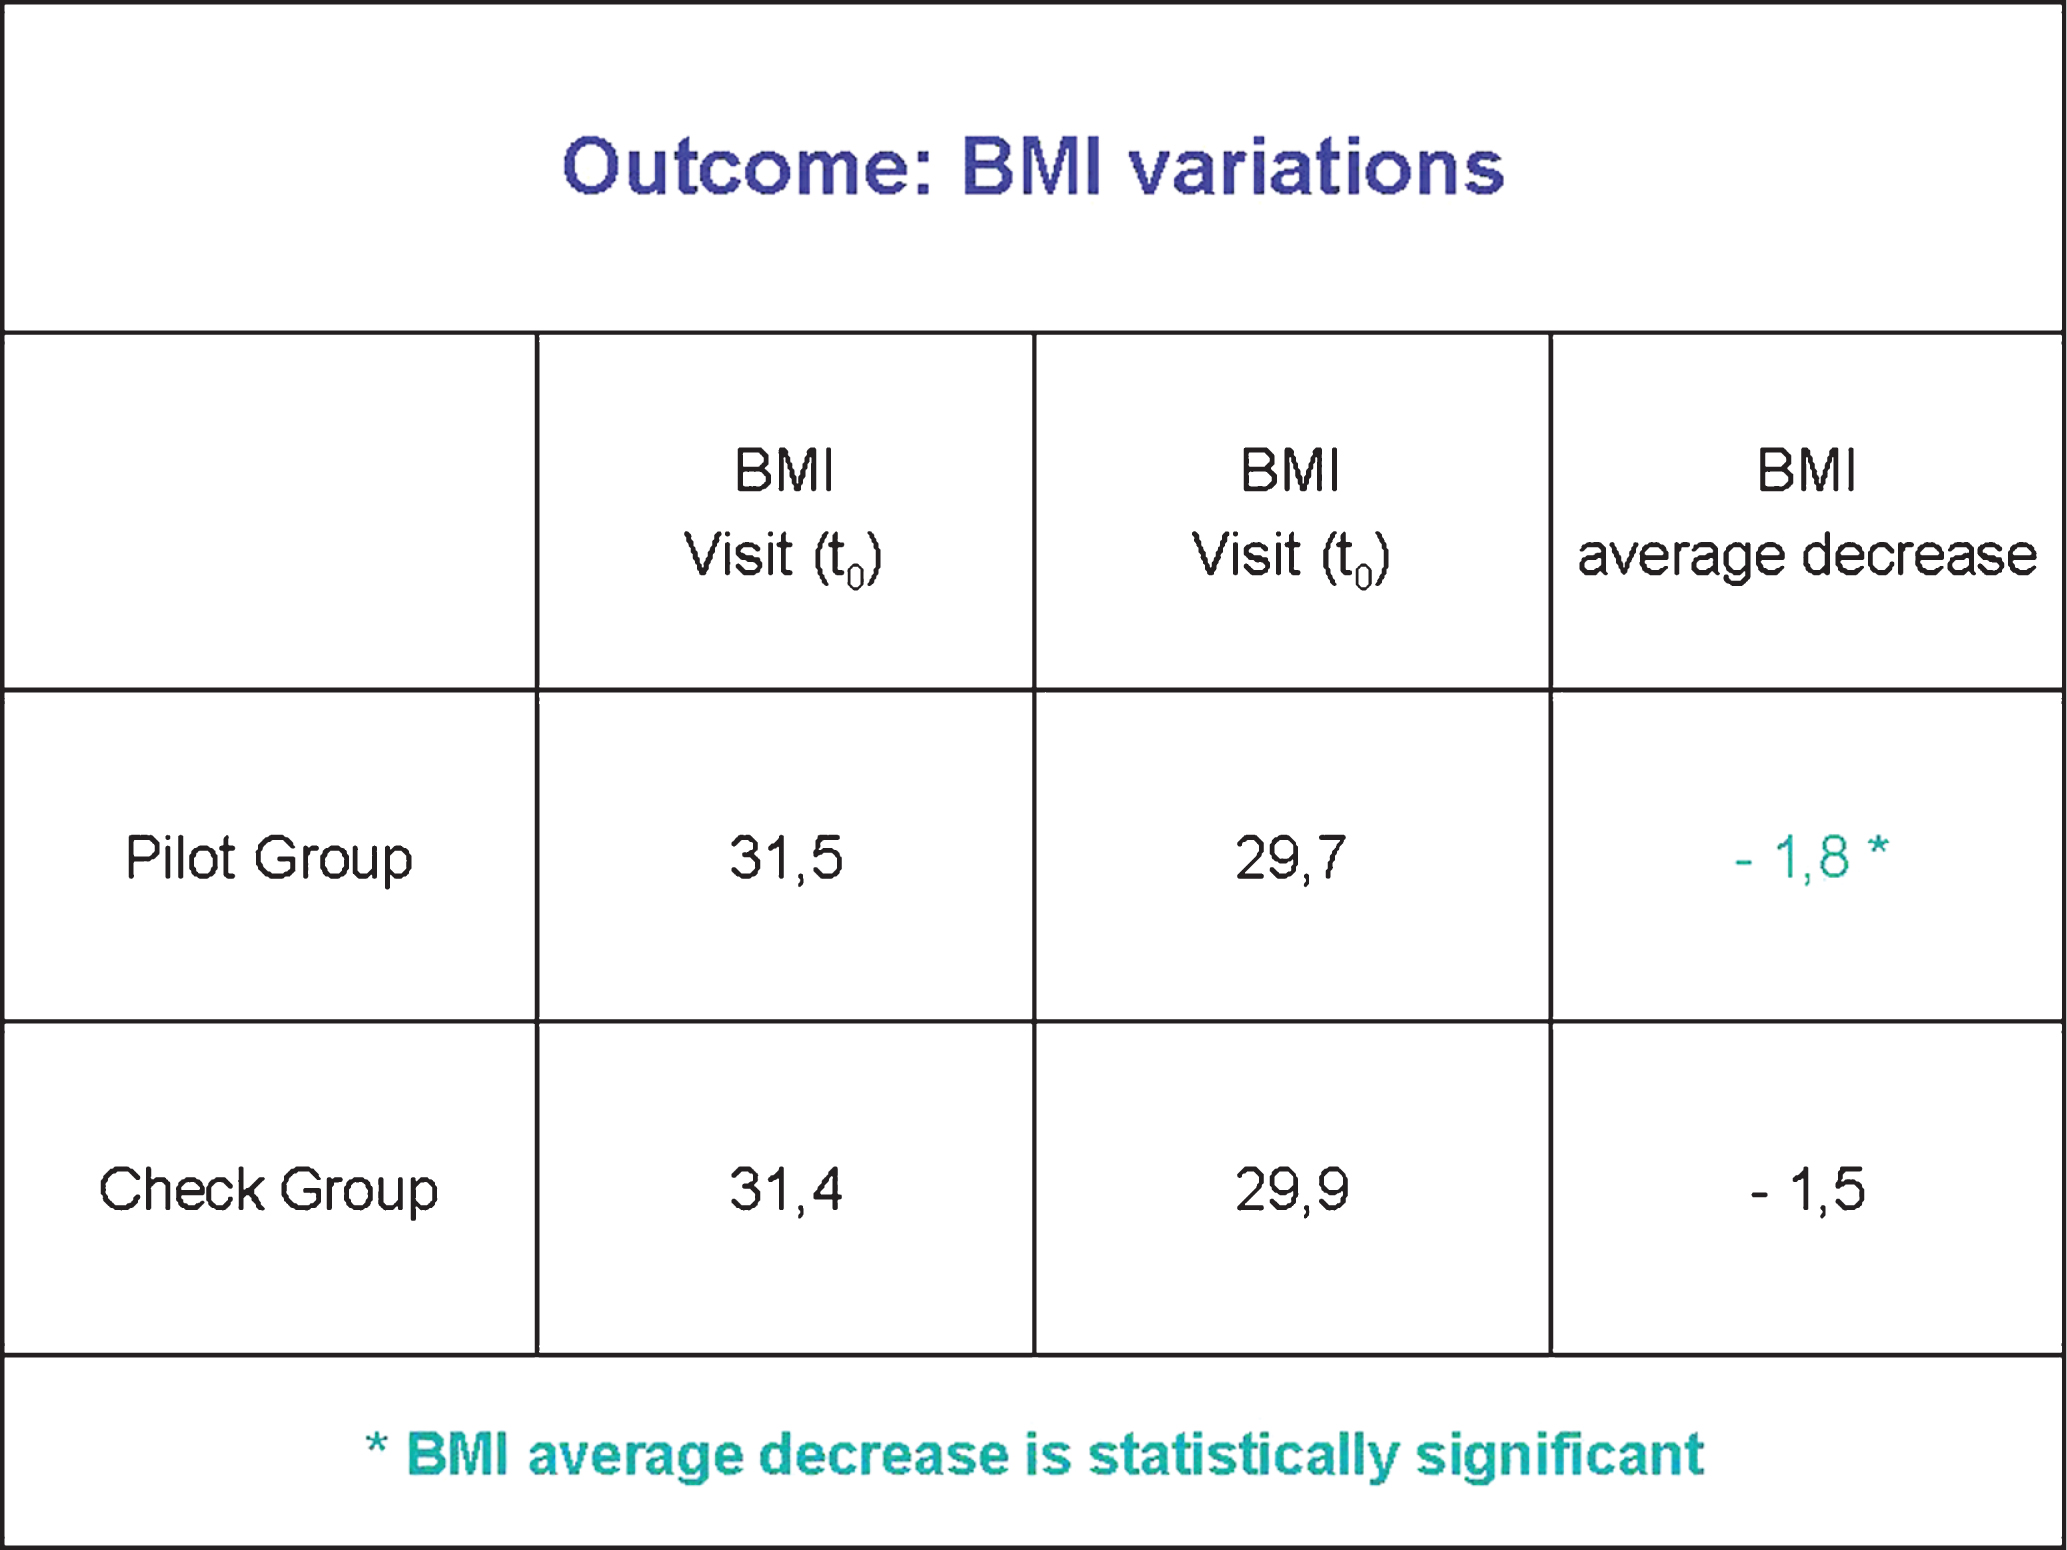 BMI variations among “Pilot” subjects and “Check” subjects.